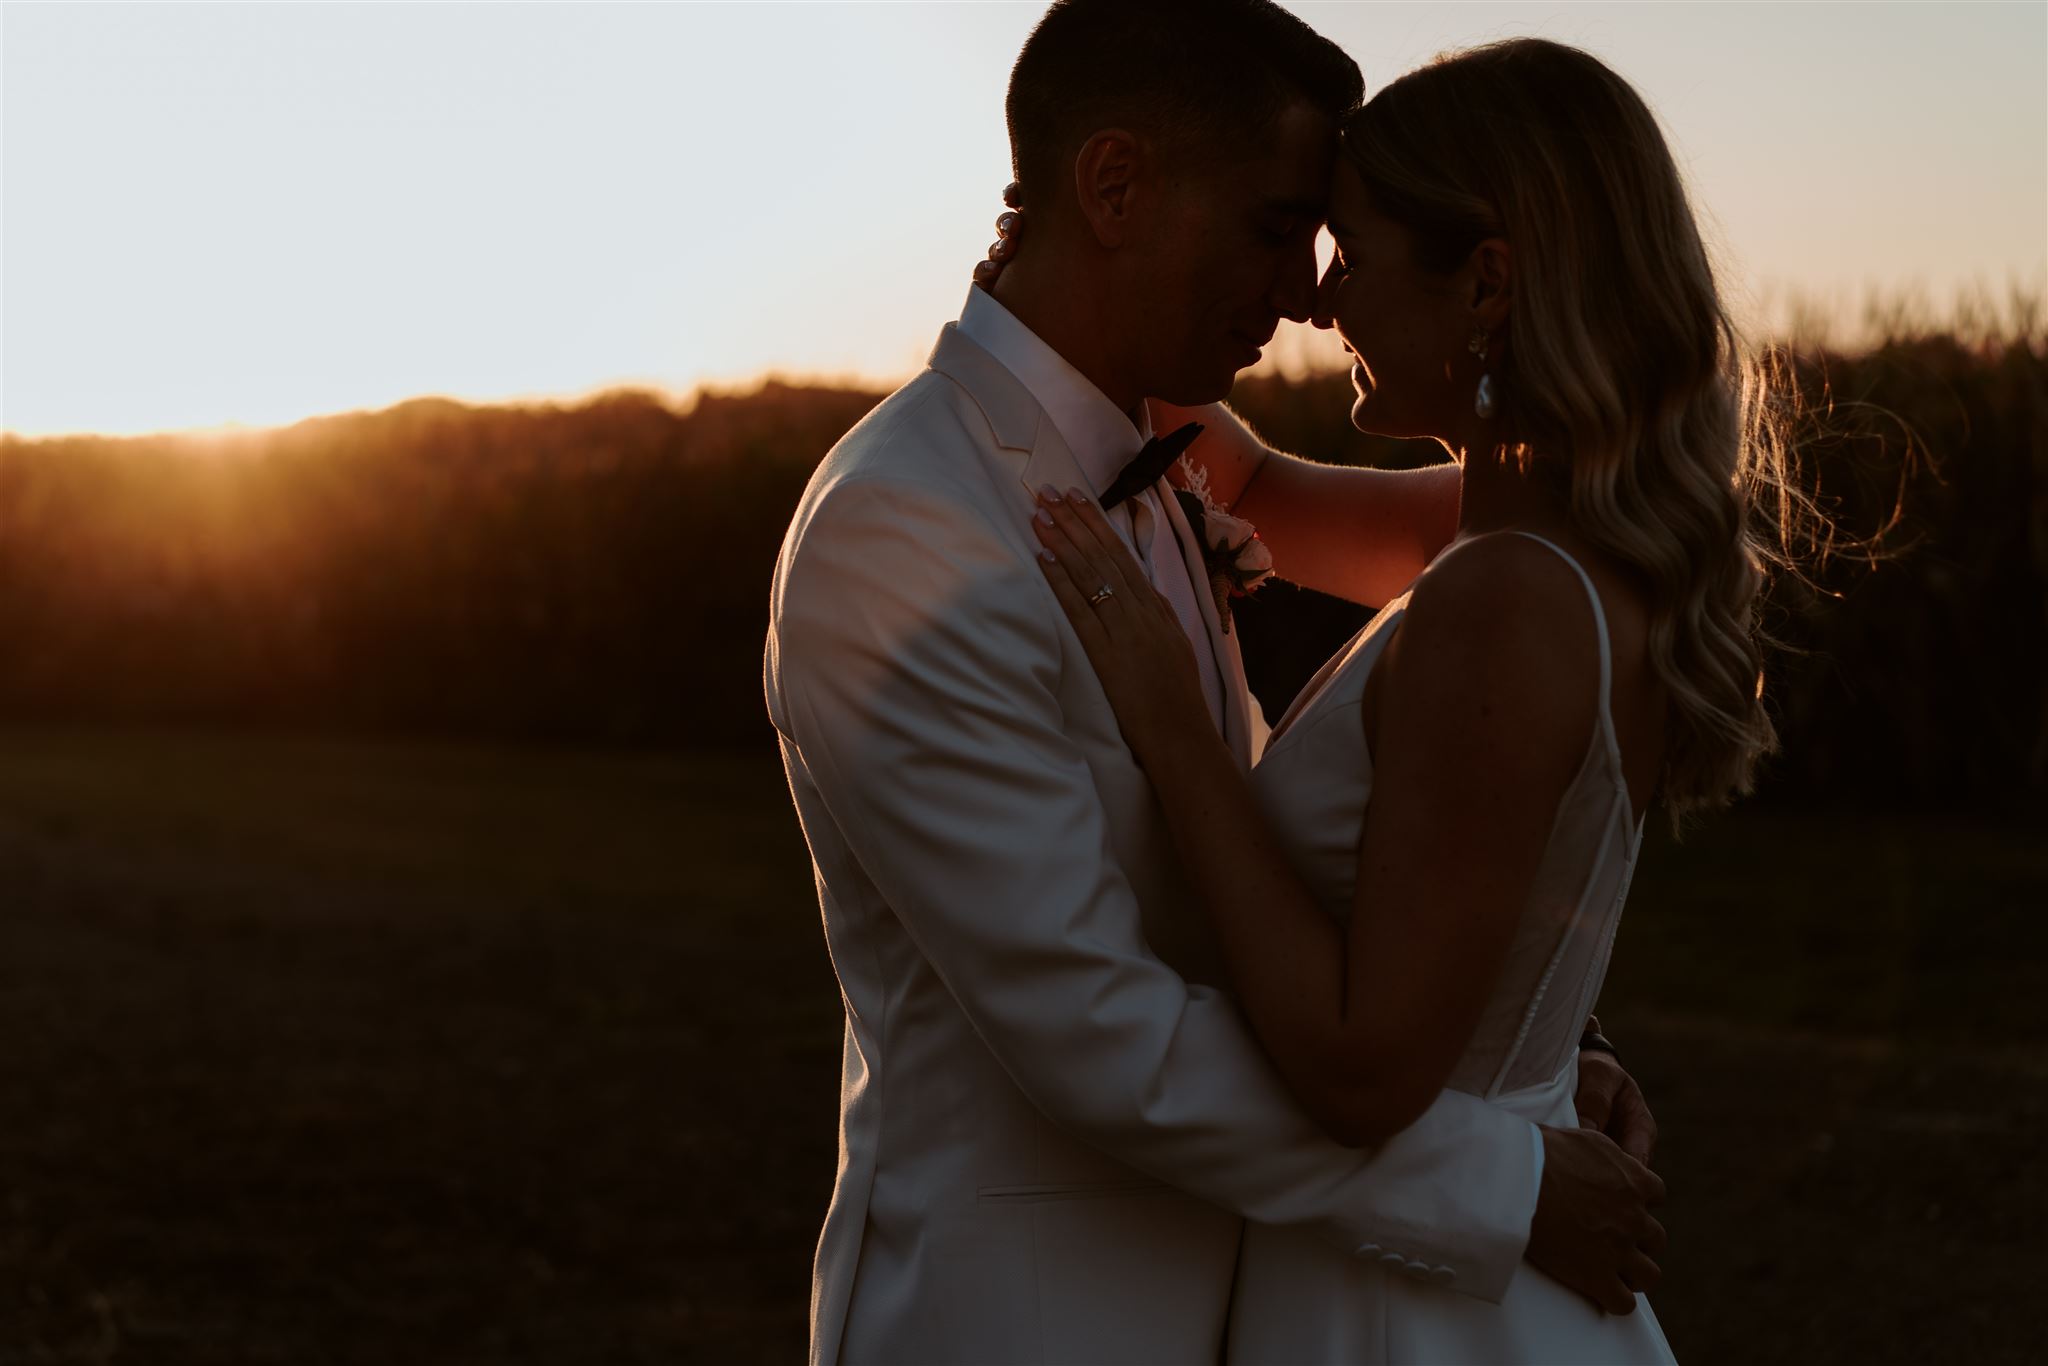 A wedding photograph of a bride and groom from the waist up, showing the sunset over the corn fields at Narrows Landing, a Waikato Wedding Venue, photographed by Haley Adele Photography.